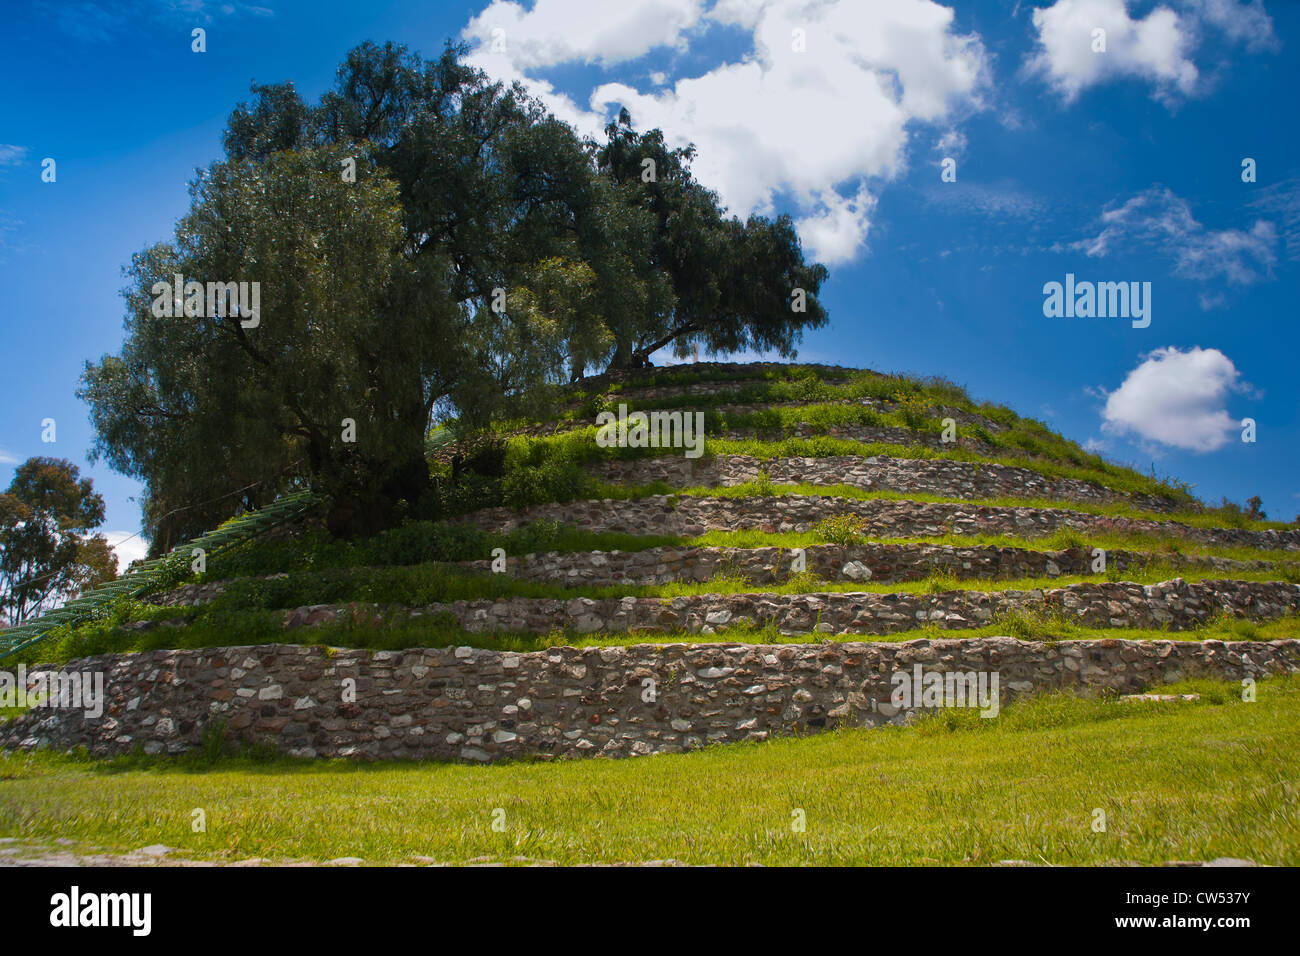 Spiral Pyramid - Xochitecatl archaeological site in the state of Tlaxcala, Mexico Stock Photo